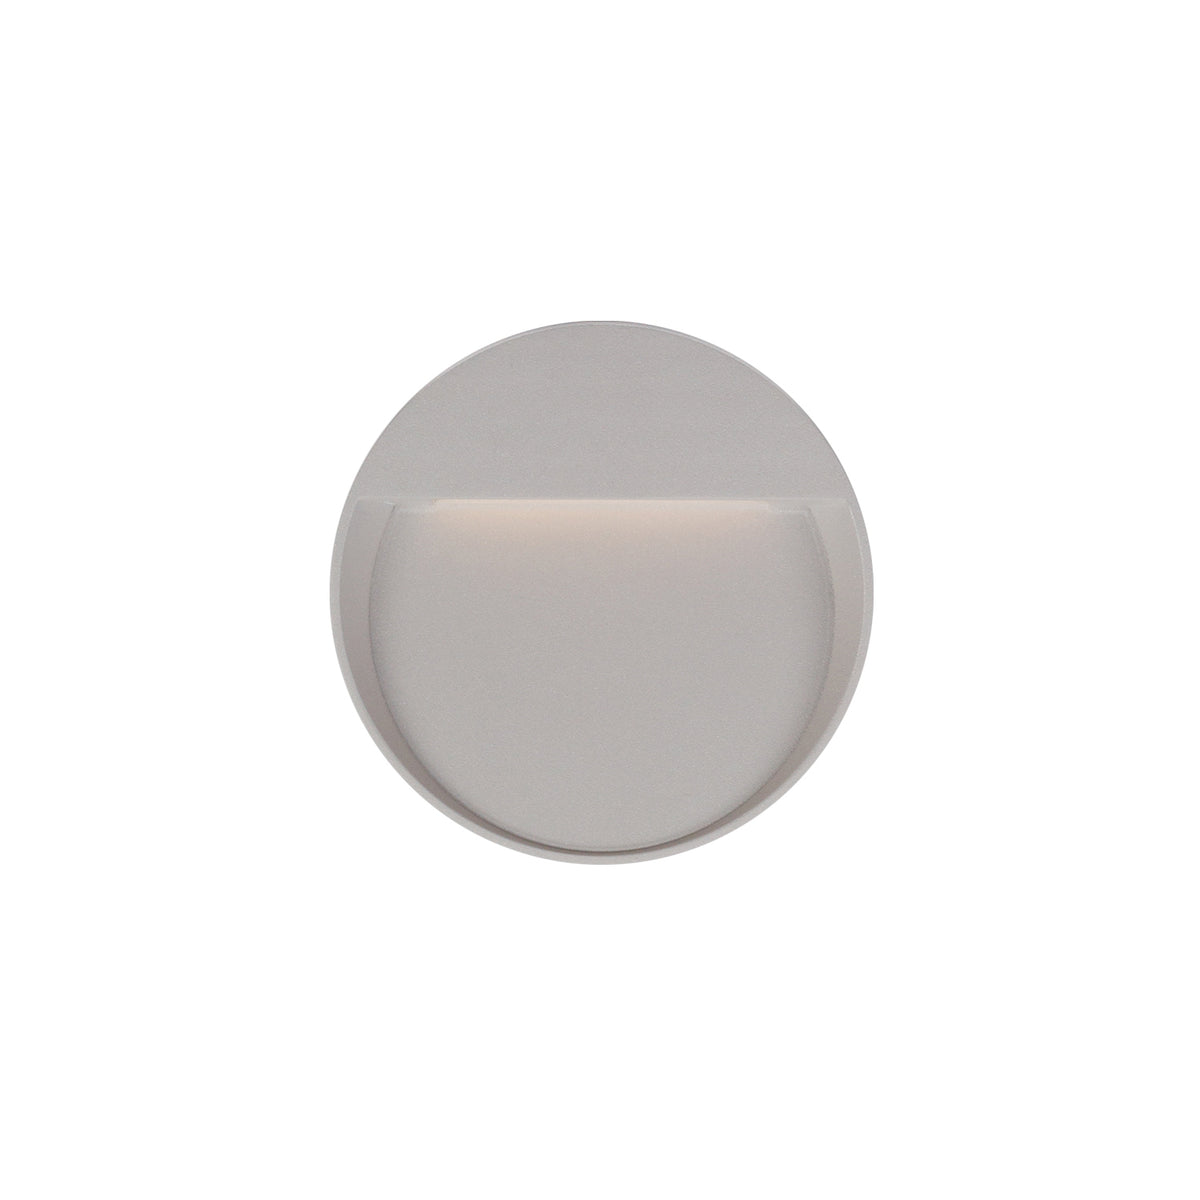 Kuzco Lighting LED Wall Sconce from the Mesa collection in Gray finish